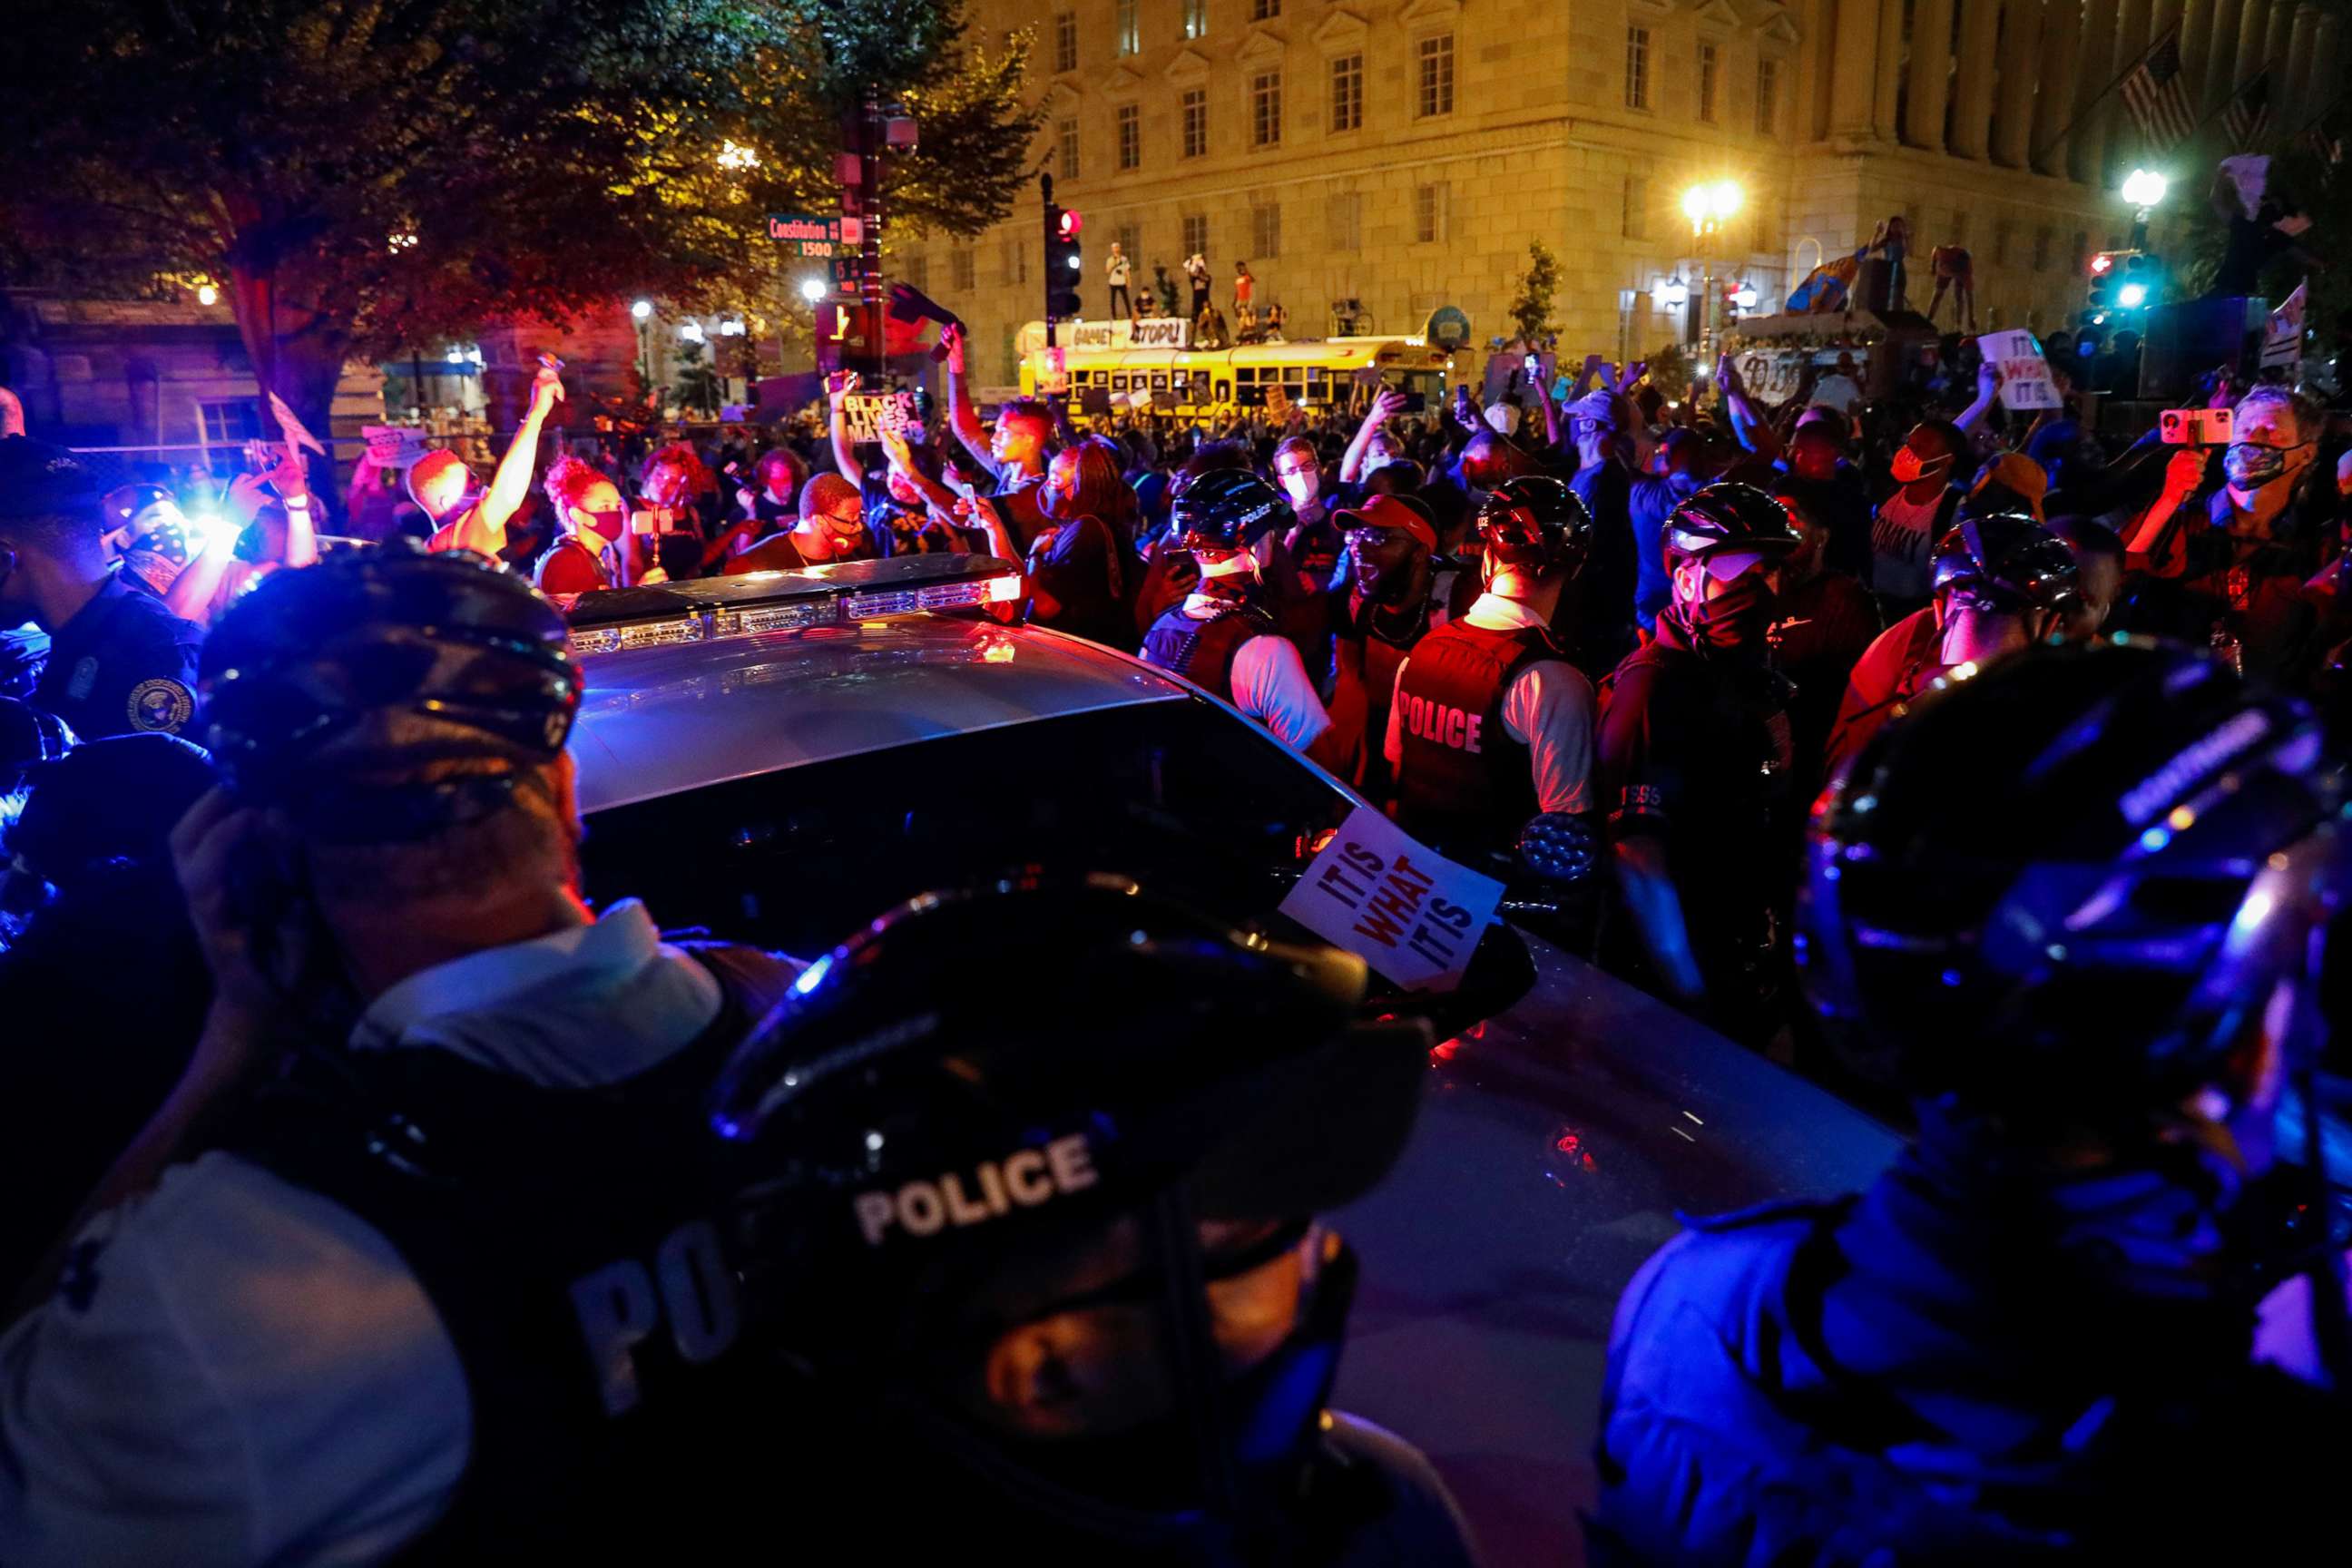 PHOTO: Demonstrators face off with police officers during a protest as police block their path on Constitution Avenue in Washington, Aug. 27, 2020.